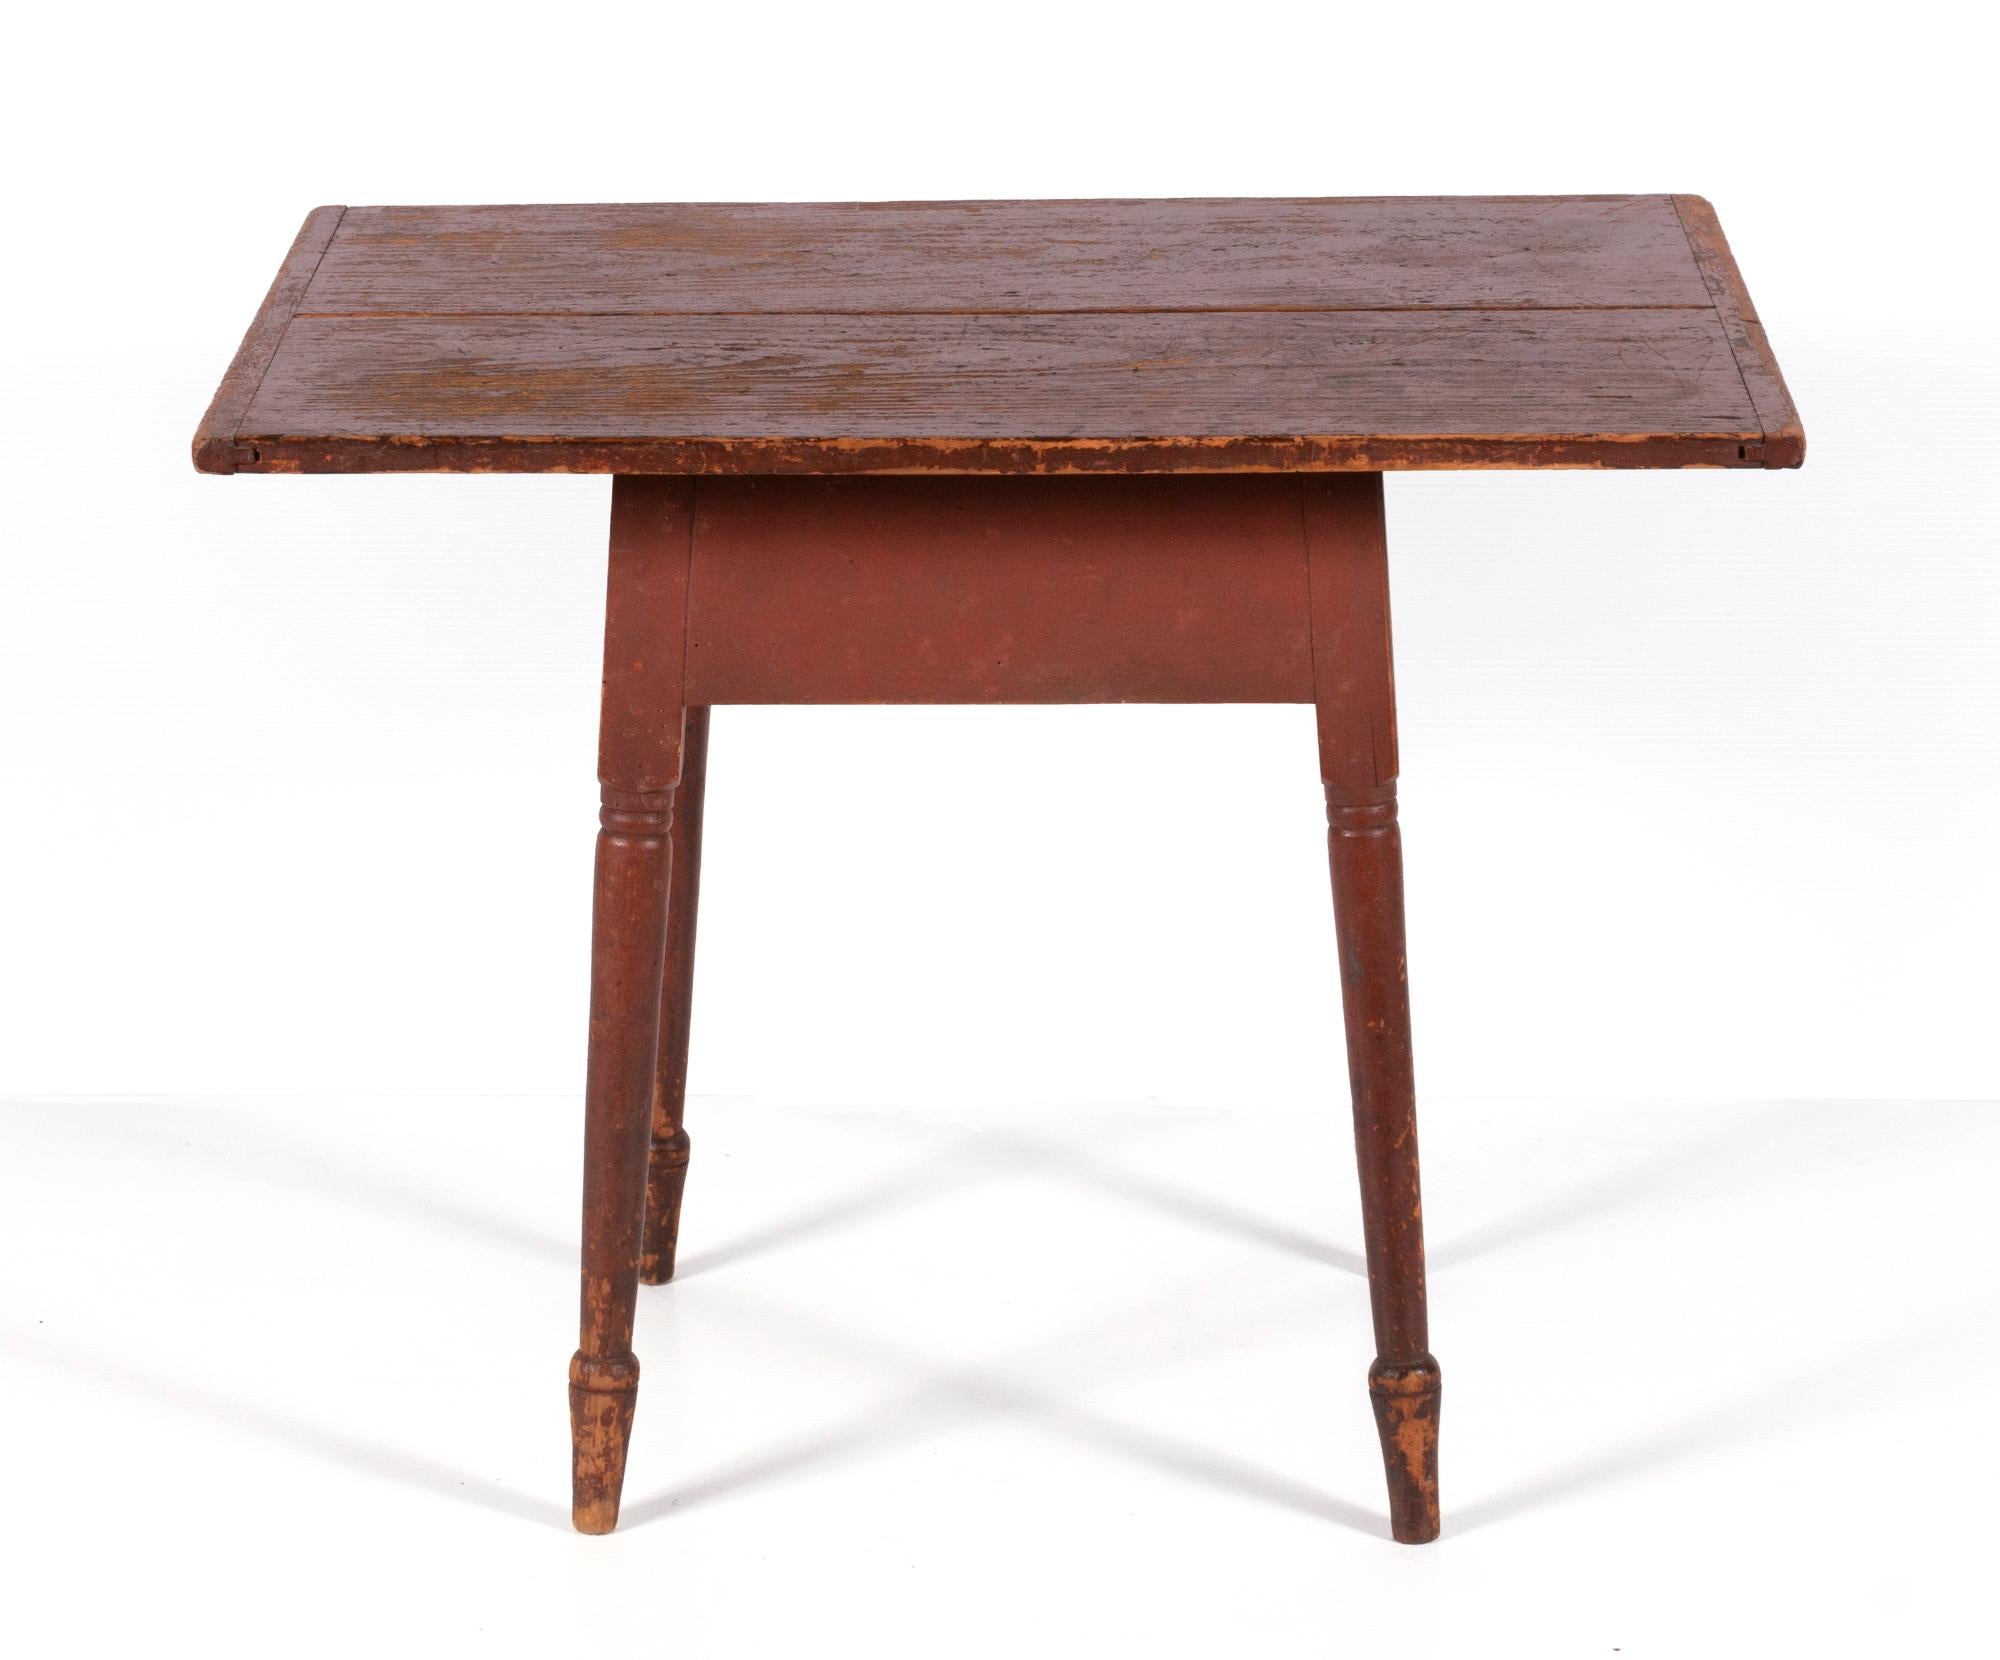 Beautiful, small scale, tavern or work table, with boldly splayed case and legs, the latter of which are finely turned and terminate in shapely, spade feet. The two-board top has breadboard ends and is original. Possibly of Maine origin, made circa